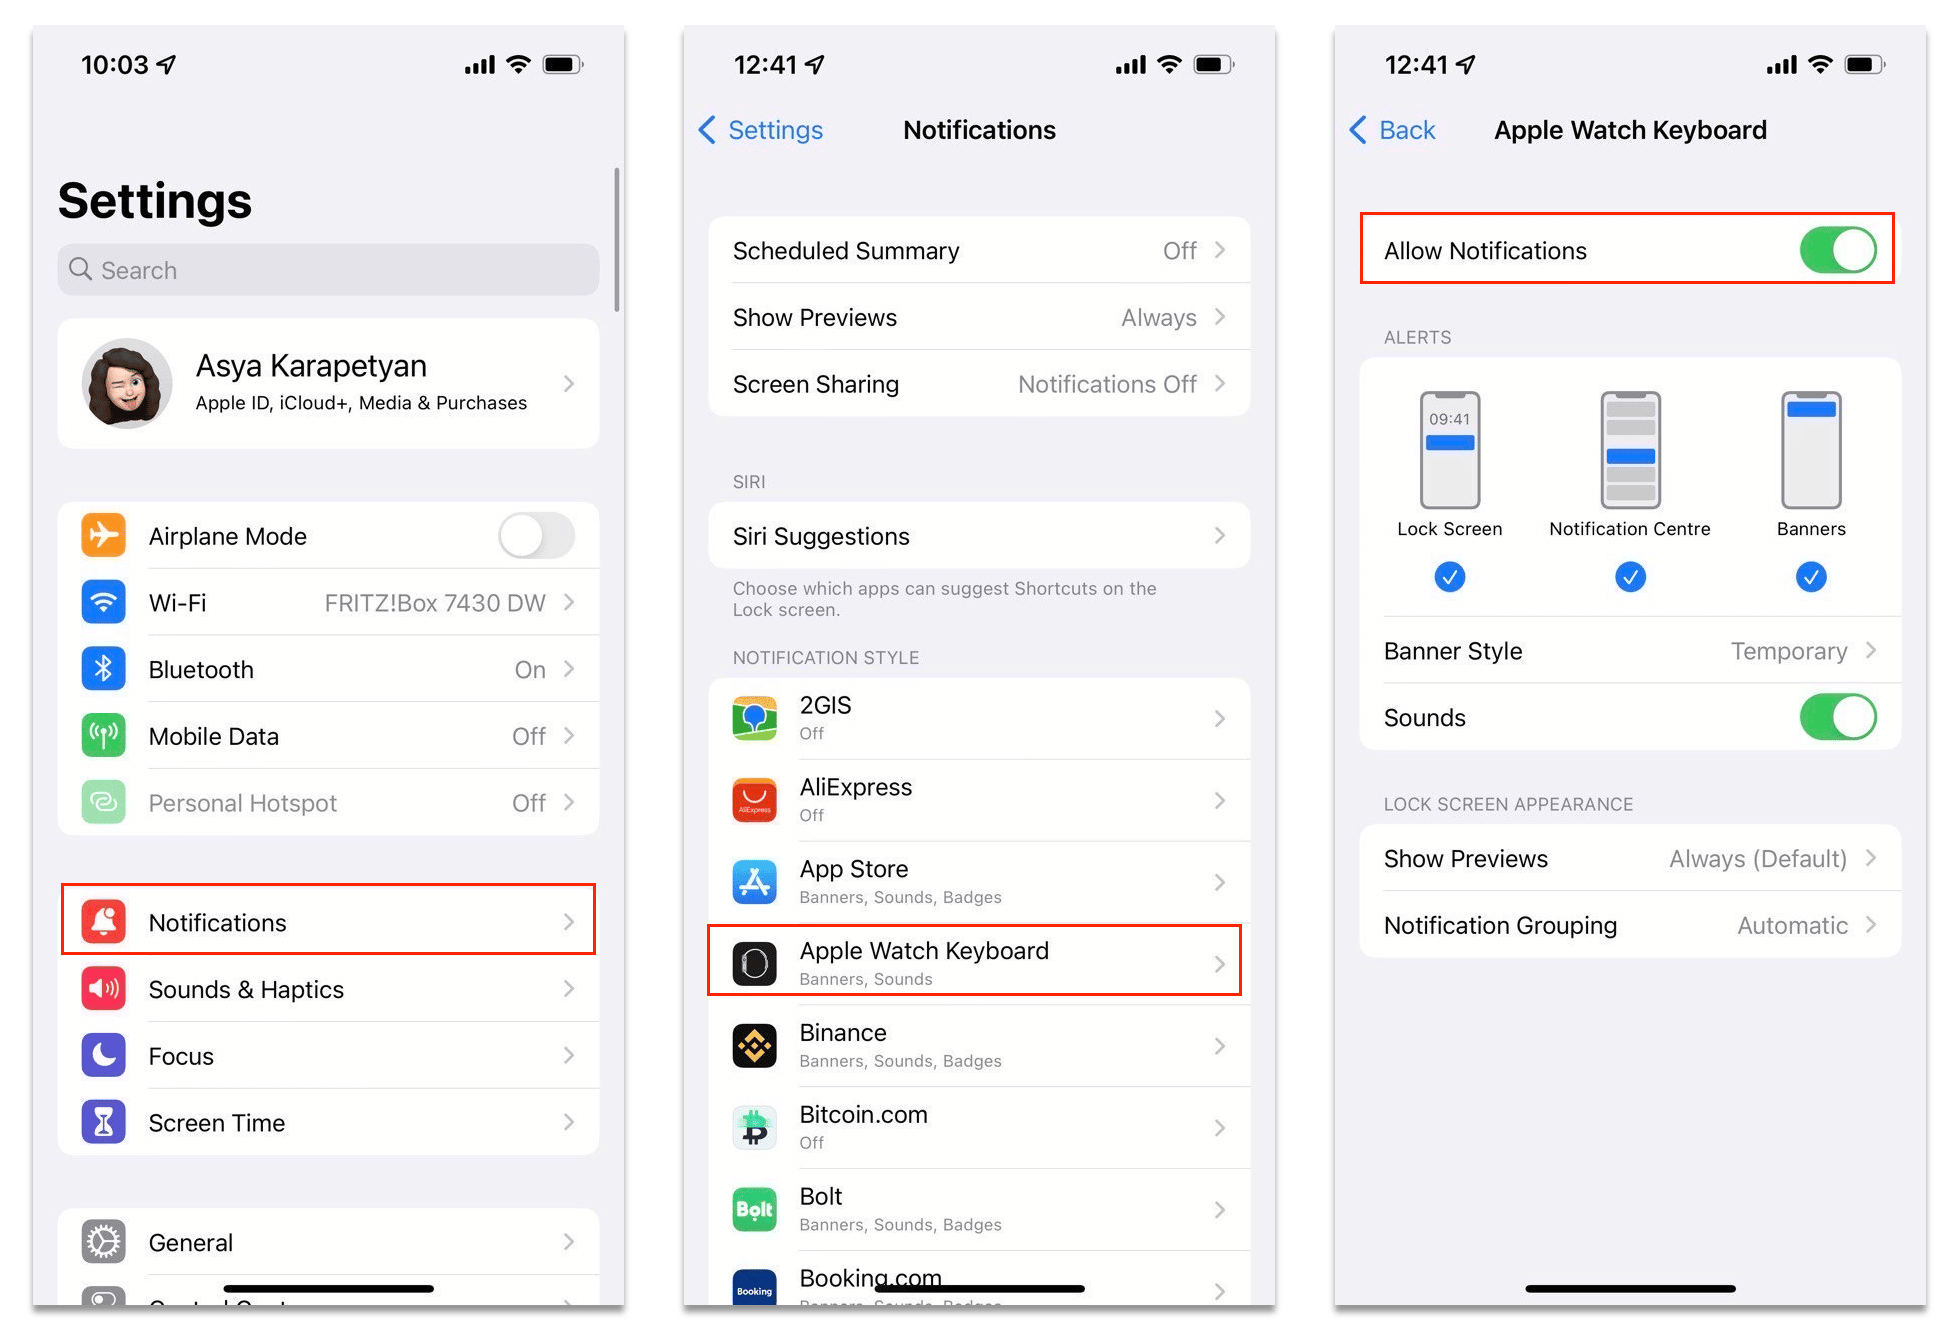 switch off notifications on iPhone